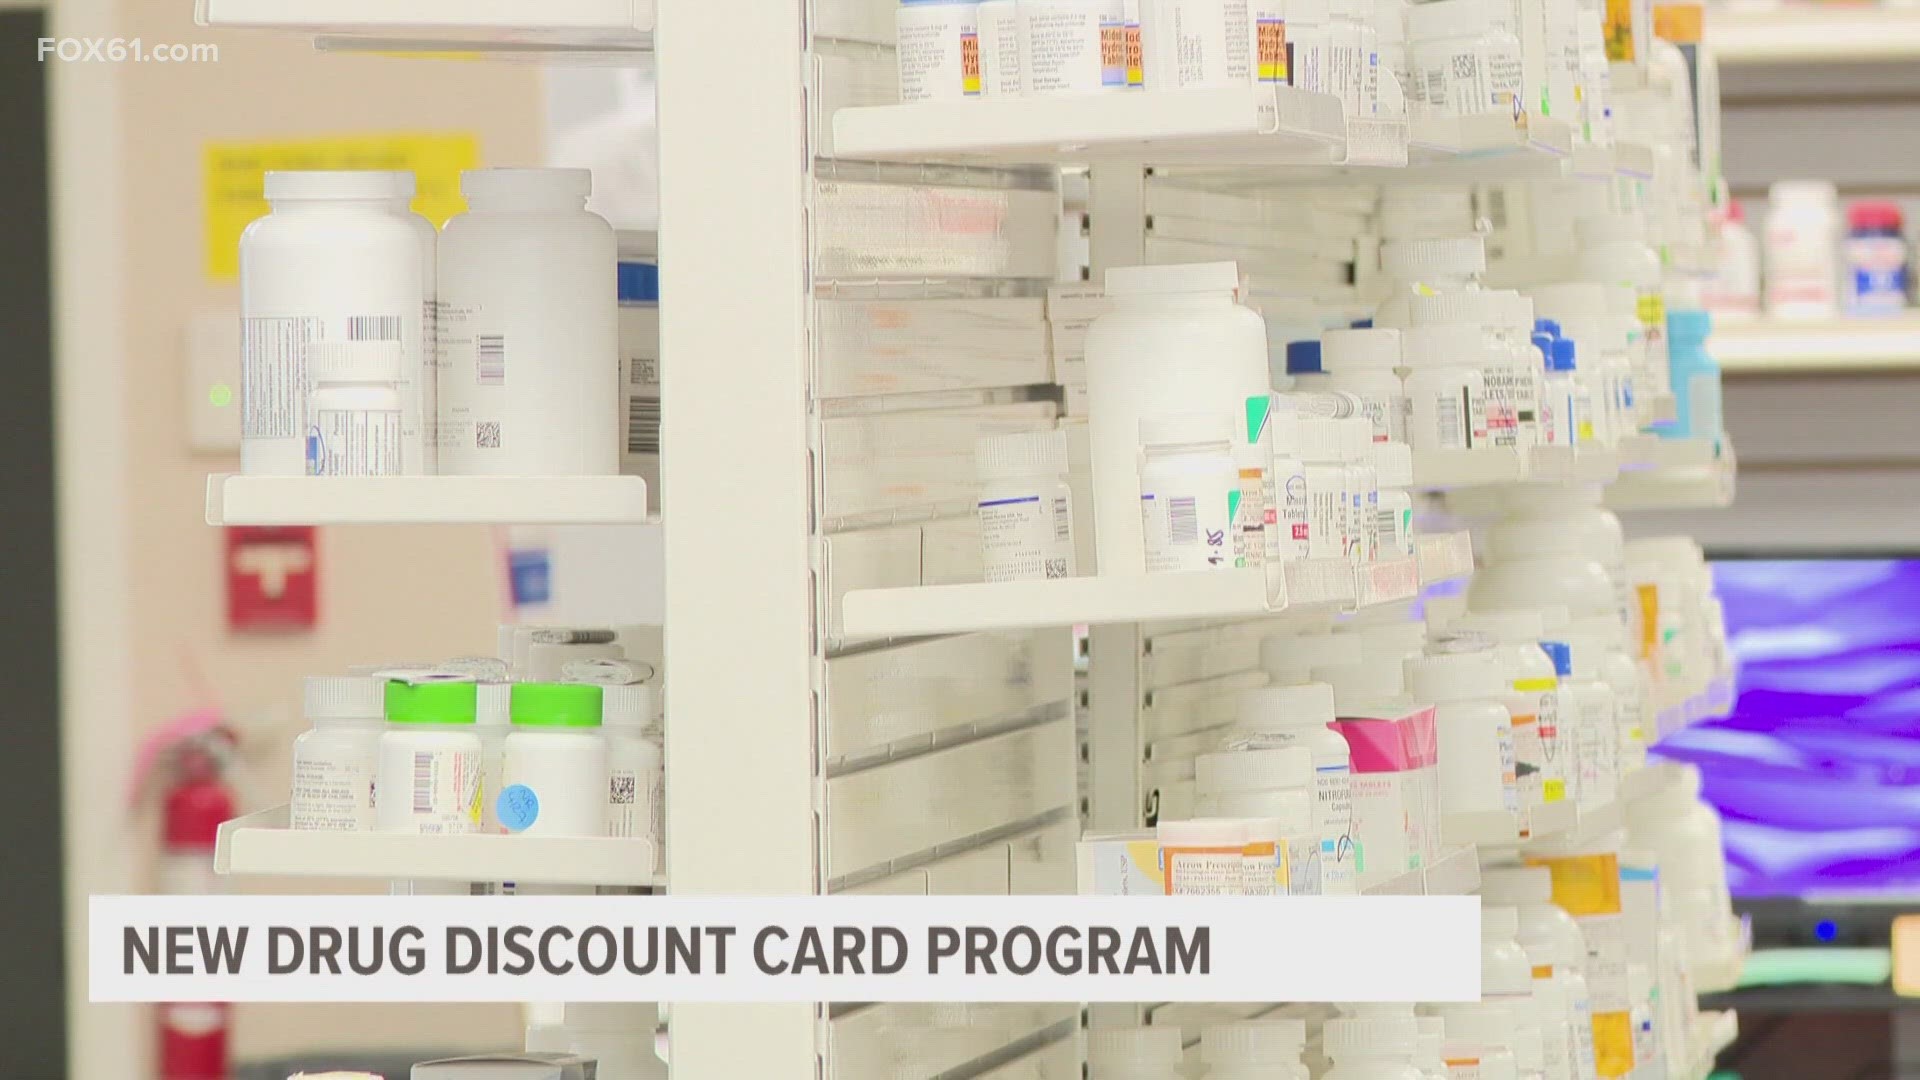 Starting next month, Connecticut residents will be able to save up to 80% on certain prescriptions.